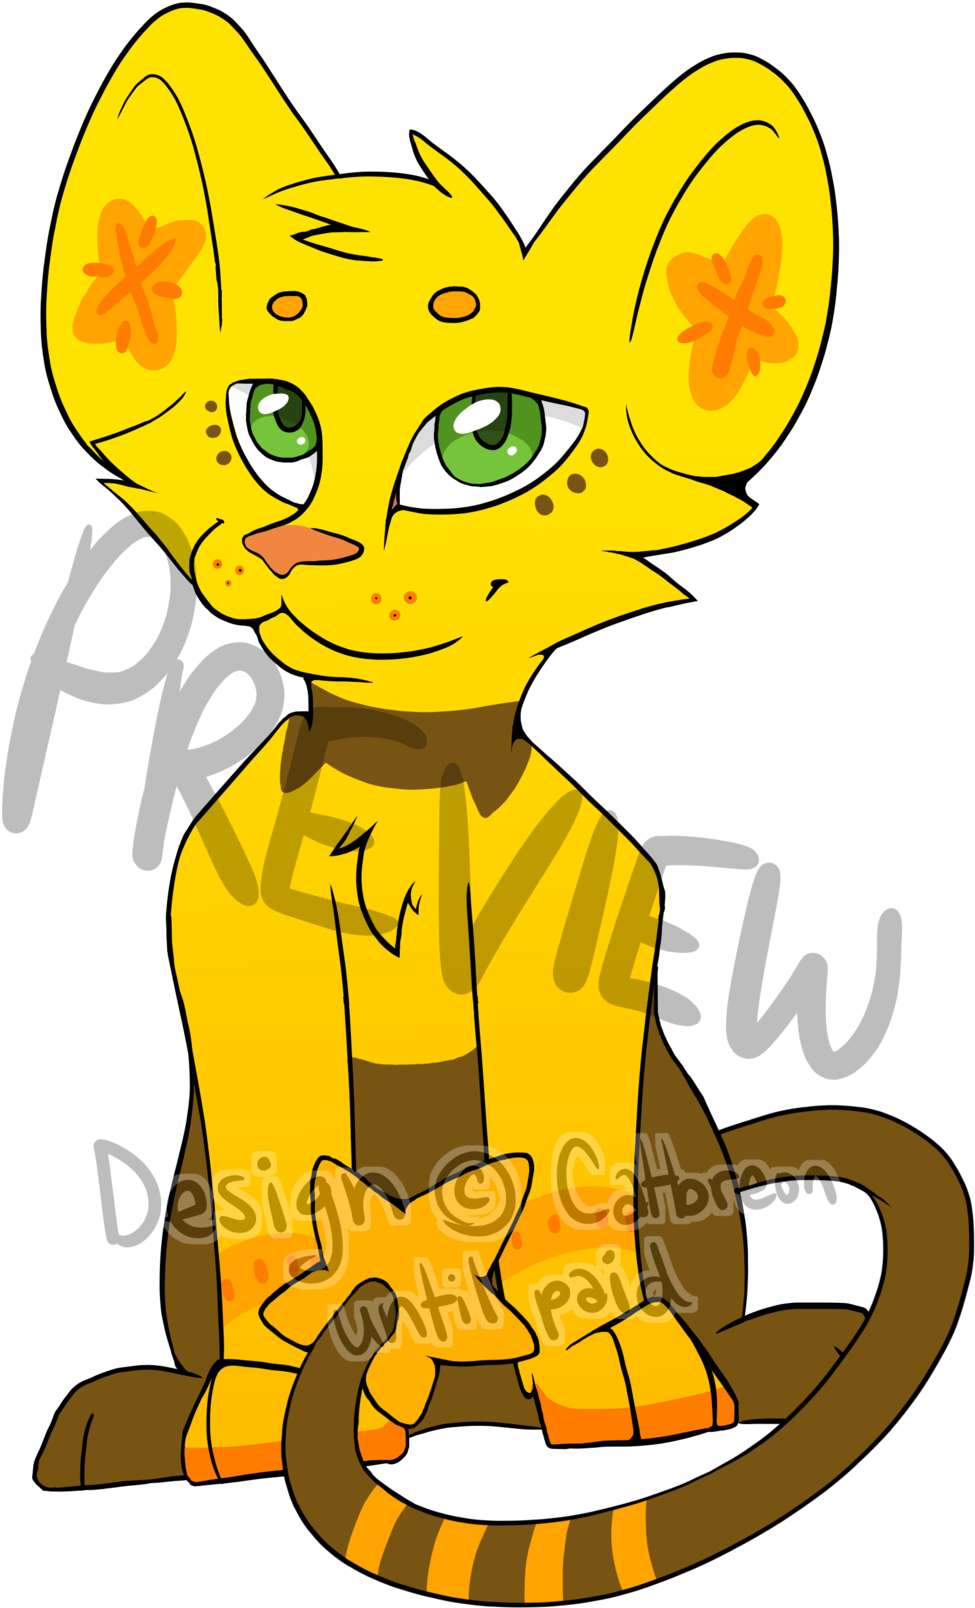 Shinx/lion Cub Adoptable By Catbreon - Domestic Short-haired Cat (1024x1676)